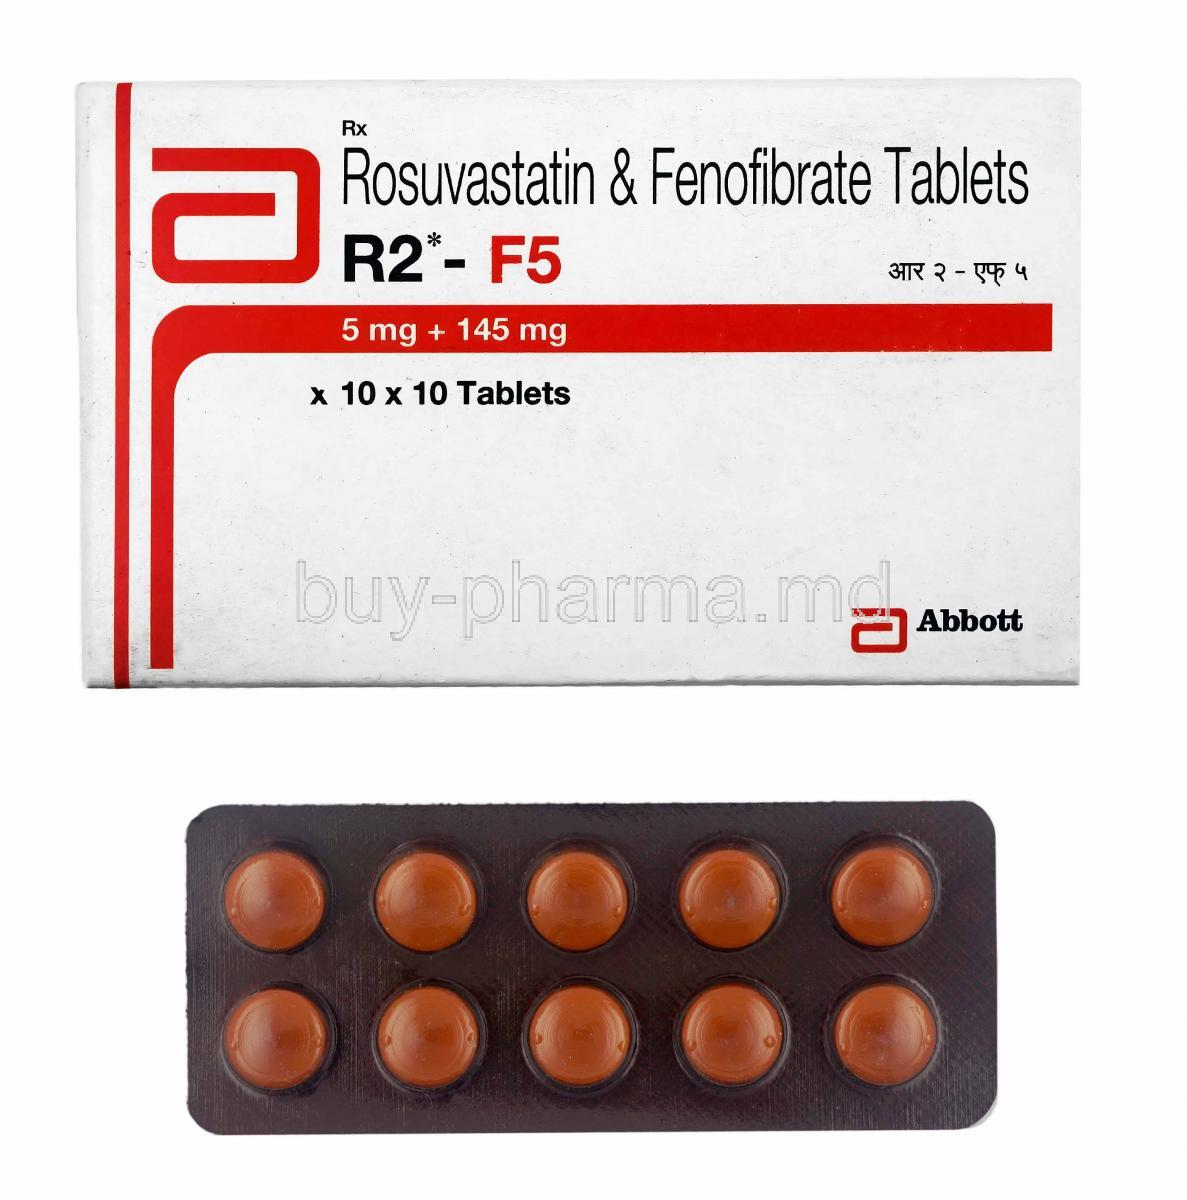 R2-F, Fenofibrate and Rosuvastatin 5mg box and tablets